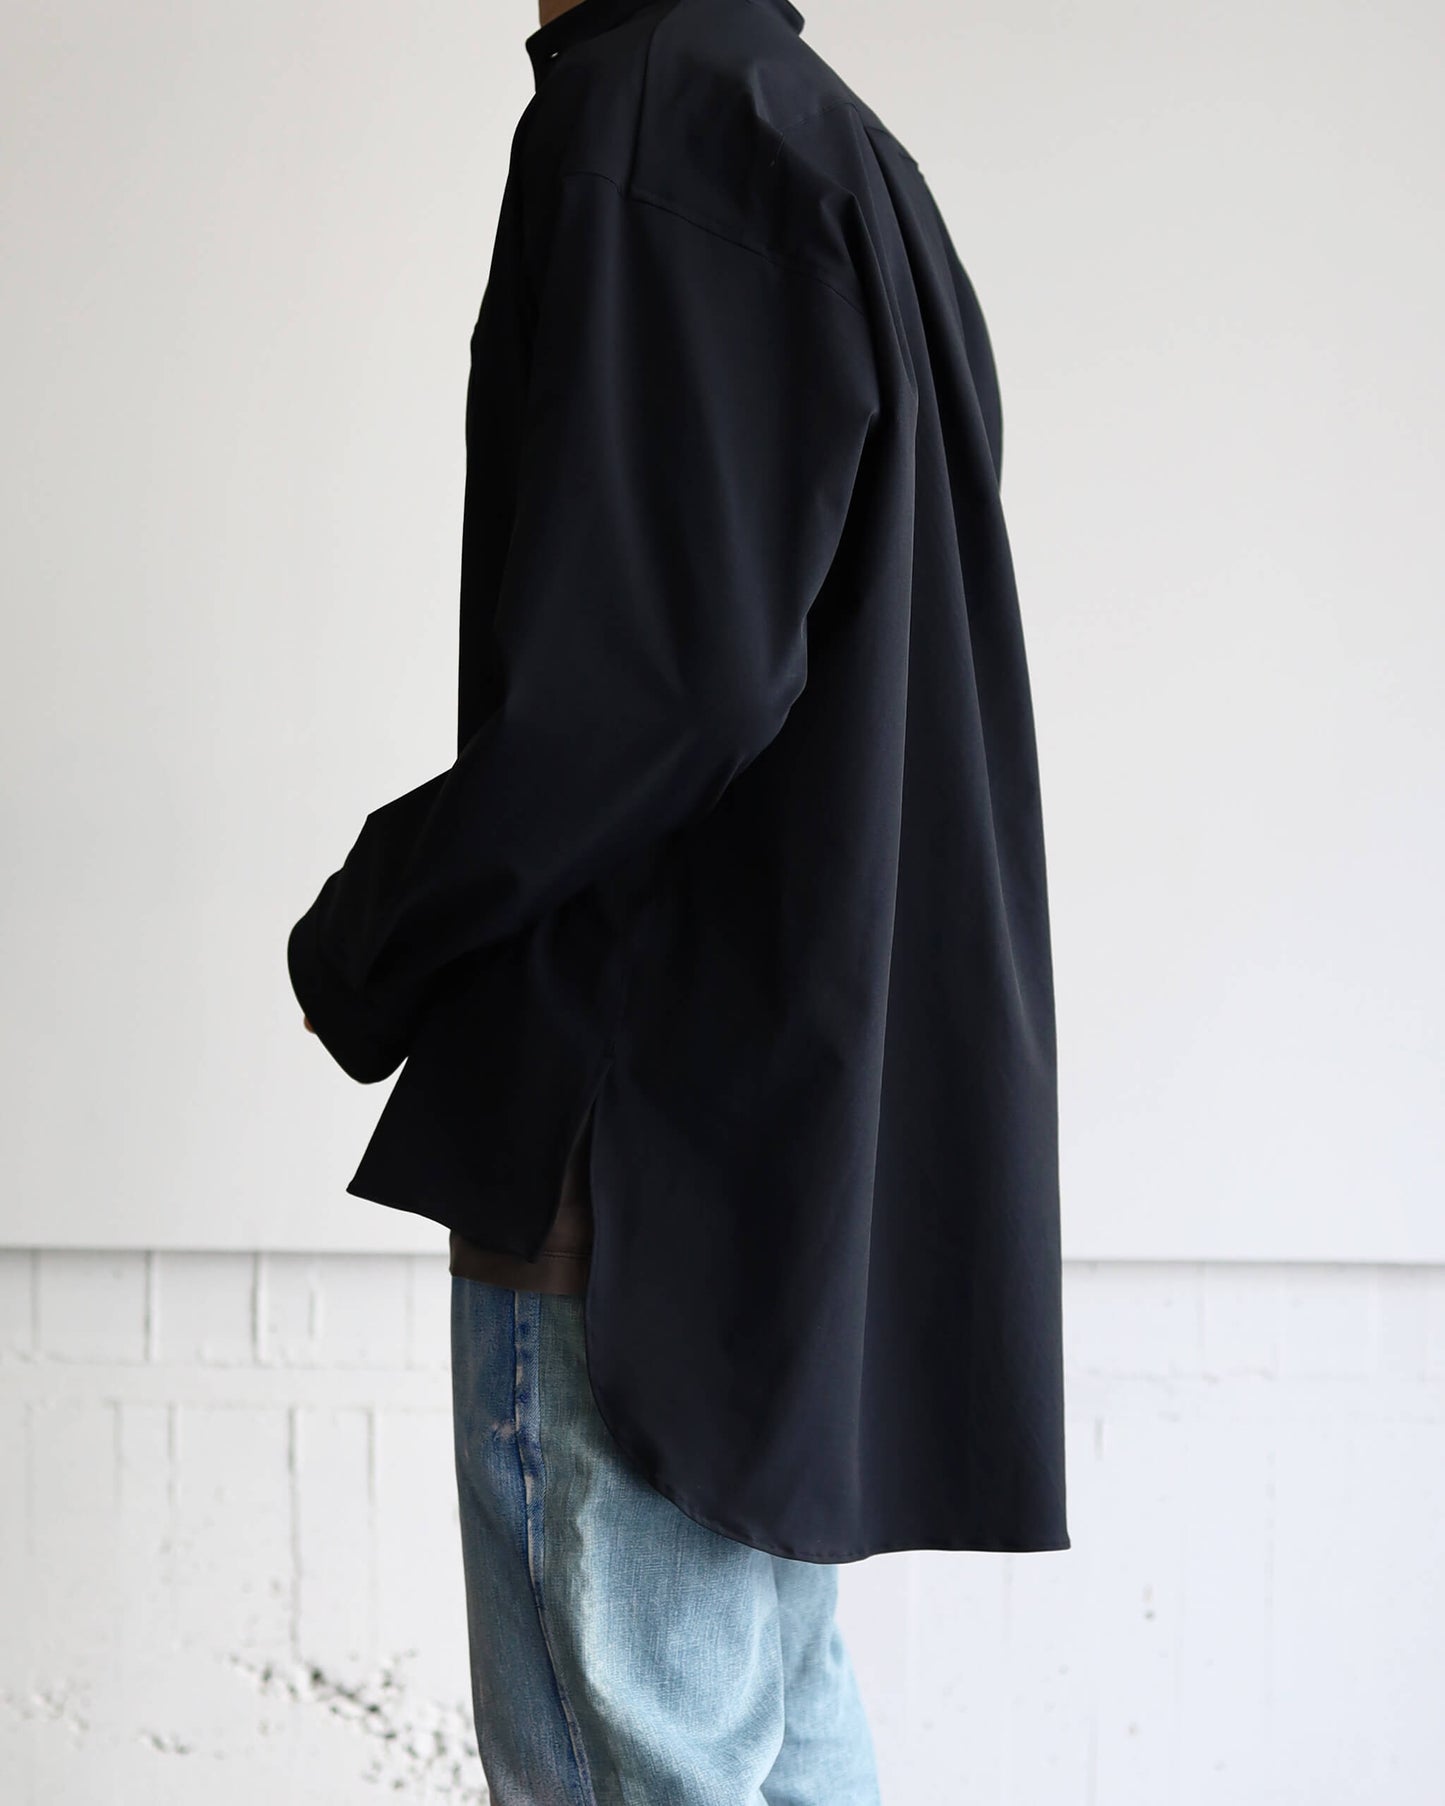 [Exclusive] Fully dull stretch - Stand collar shirt "Black"